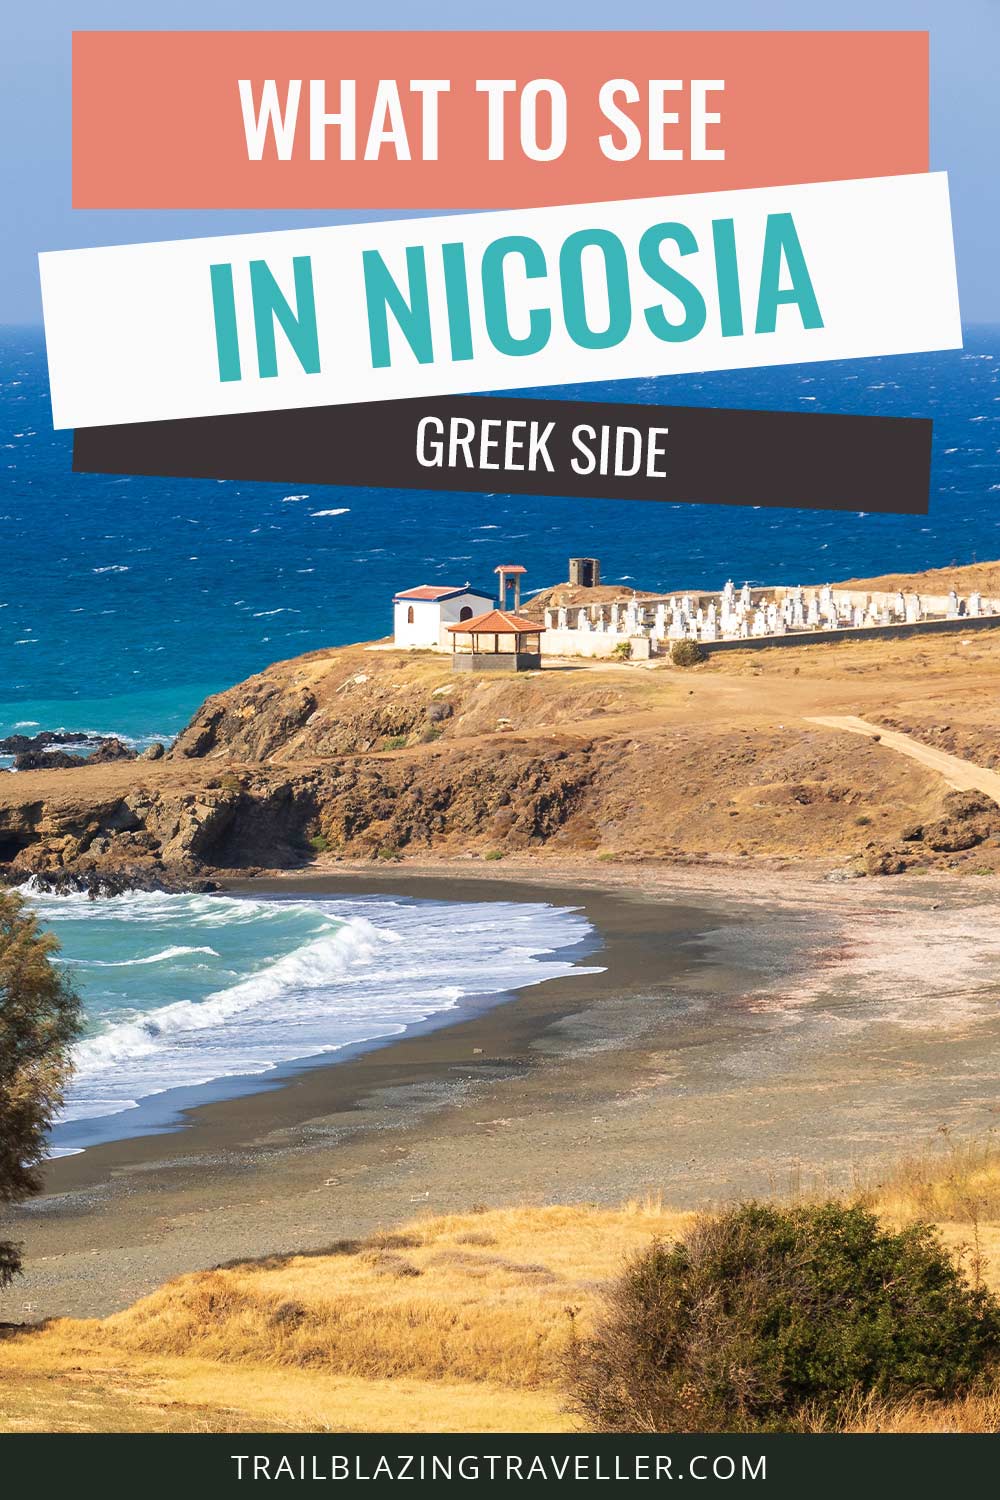 What To See In Nicosia Greek Side